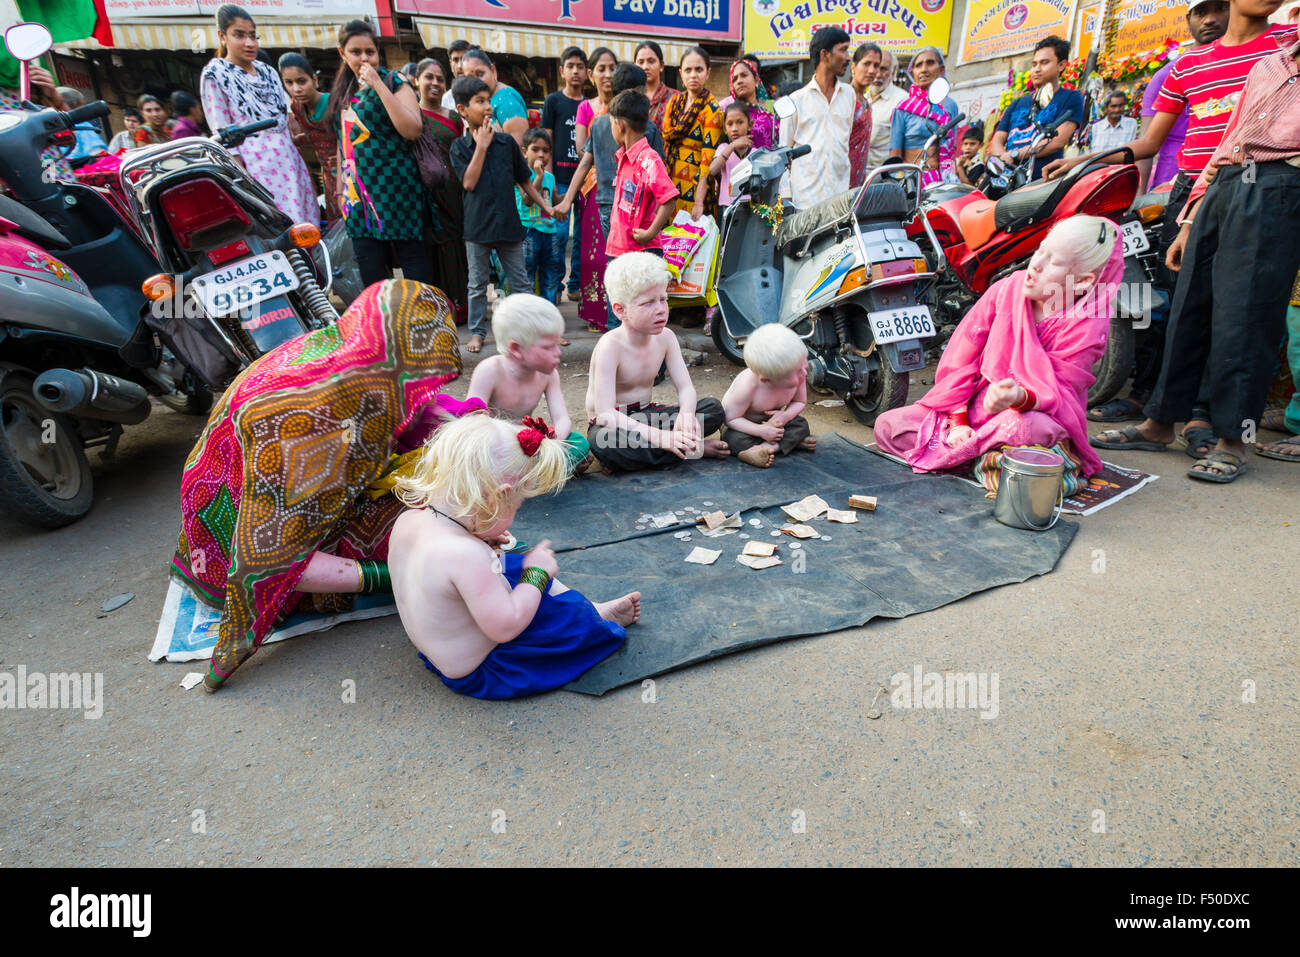 A family of Albinos, all have extremely pale skin and near-white hair, is begging for money on the street Stock Photo